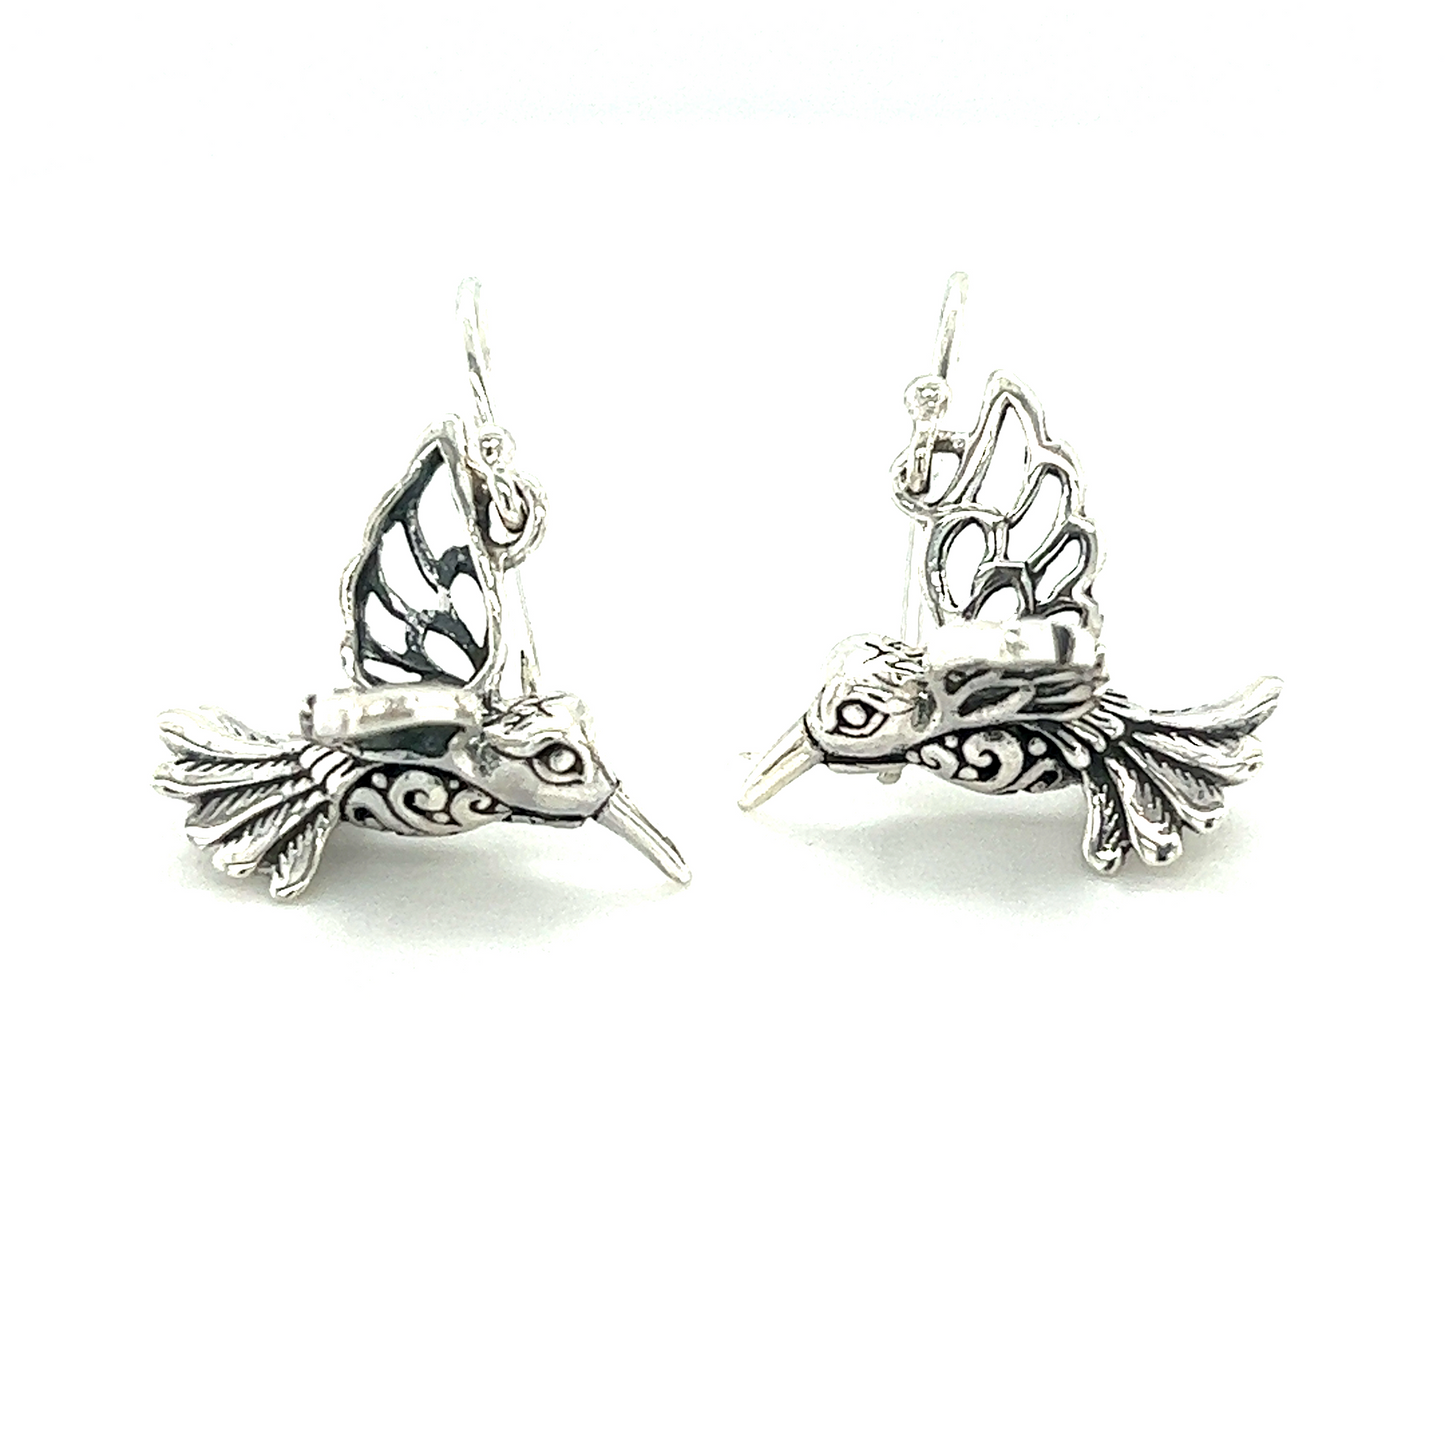 A pair of Super Silver Filigree Hummingbird Earrings on a white background.